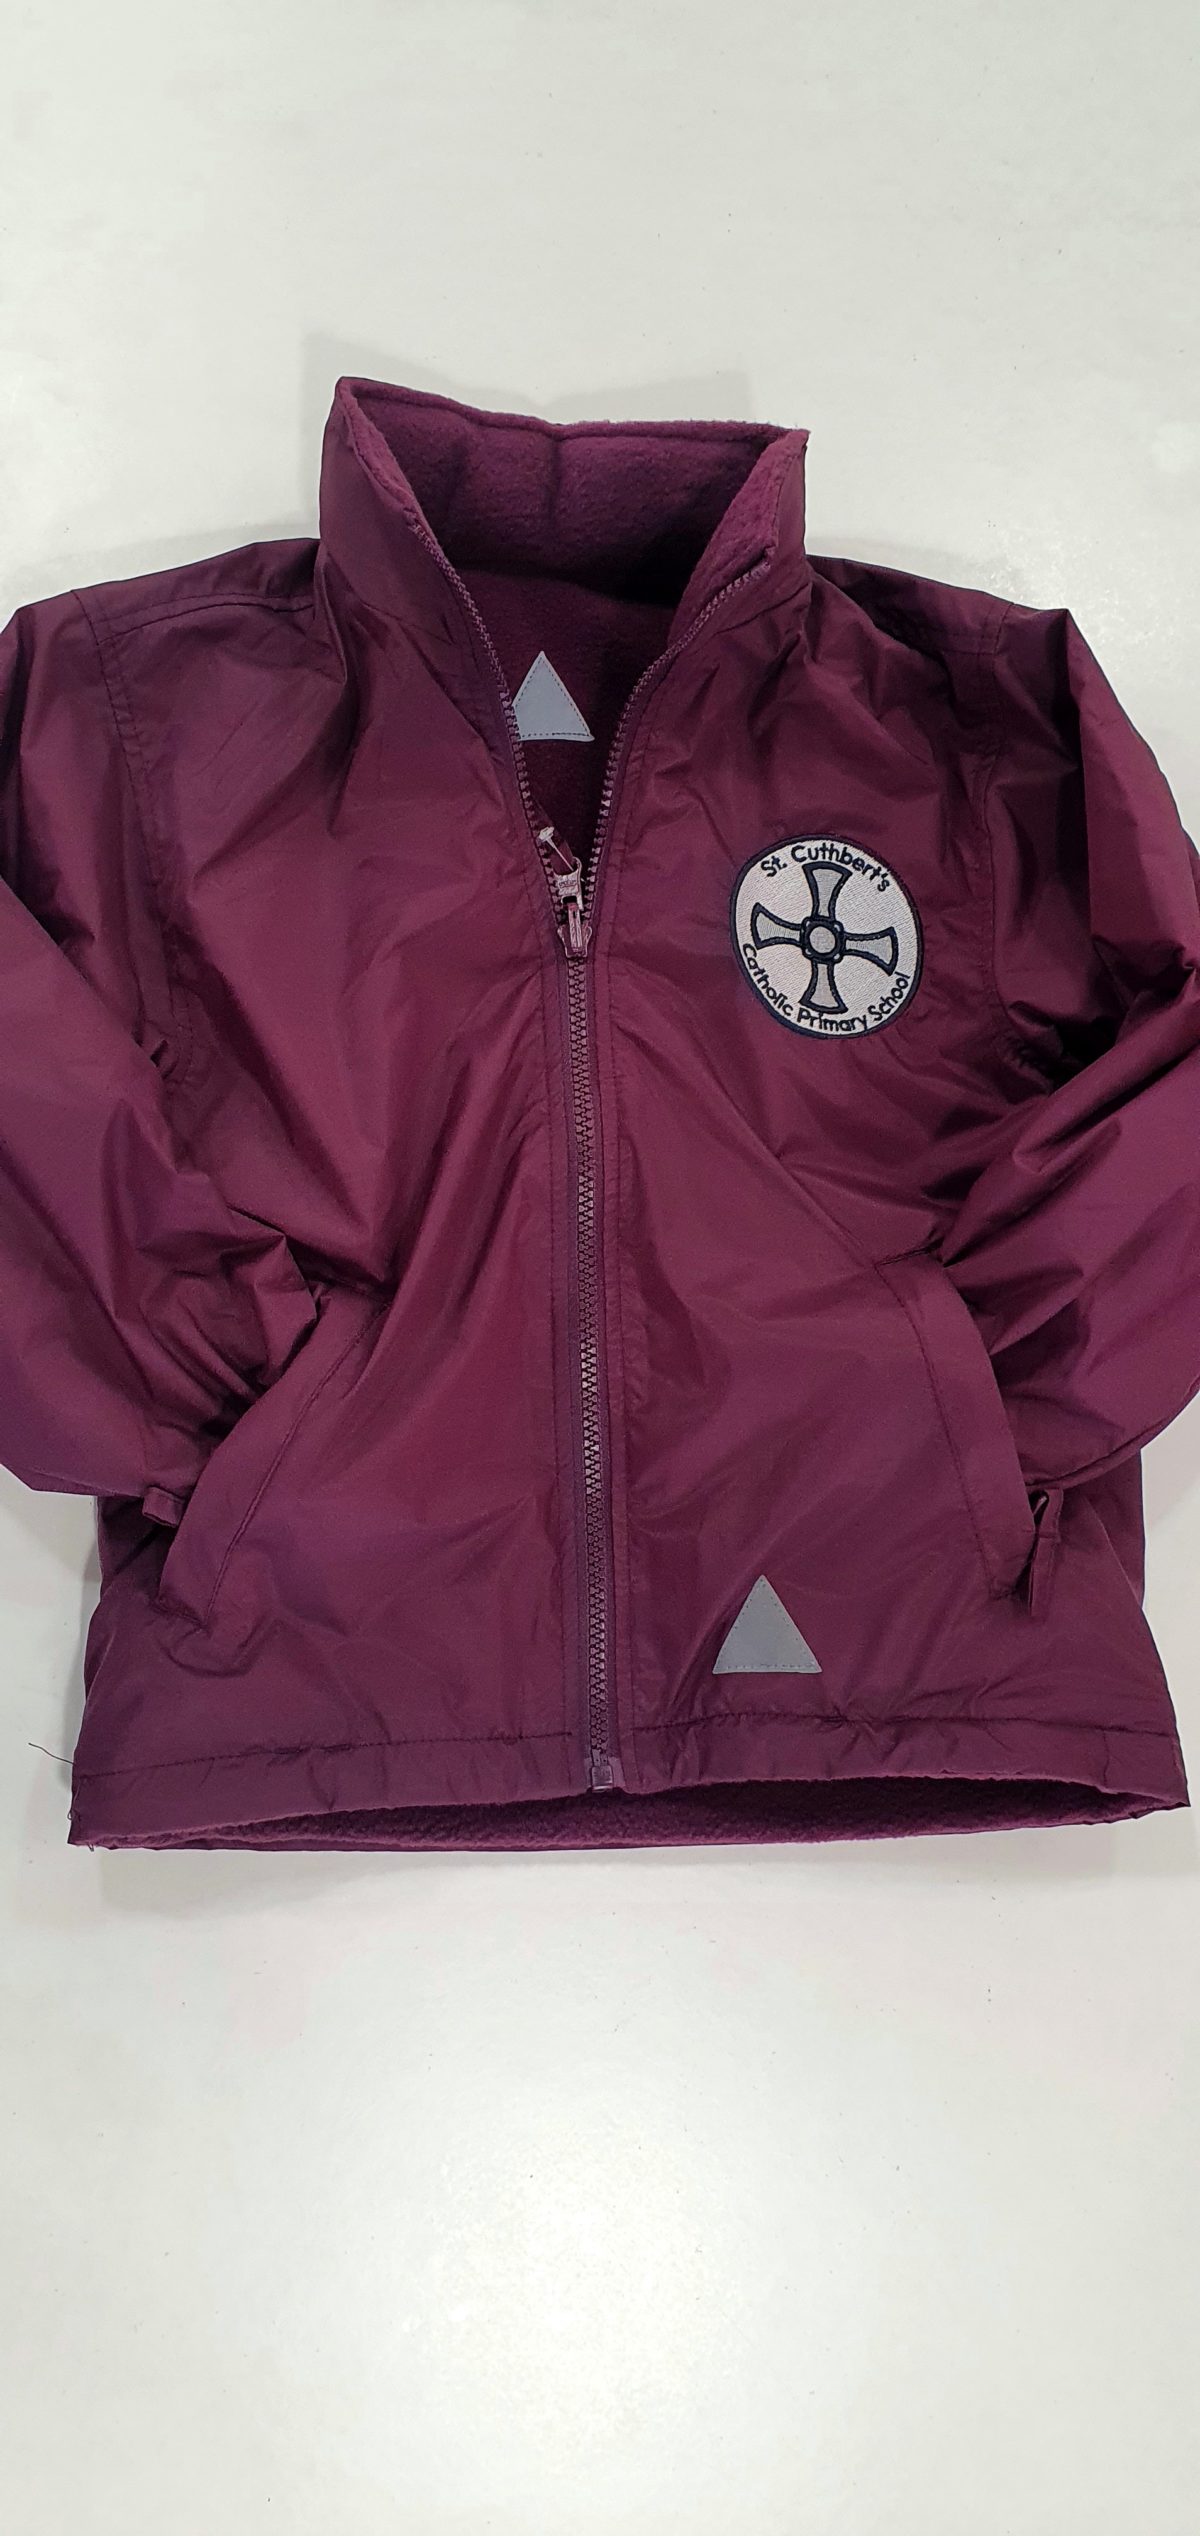 BURGUNDY REVERSIBLE JACKET with embroidered school logo